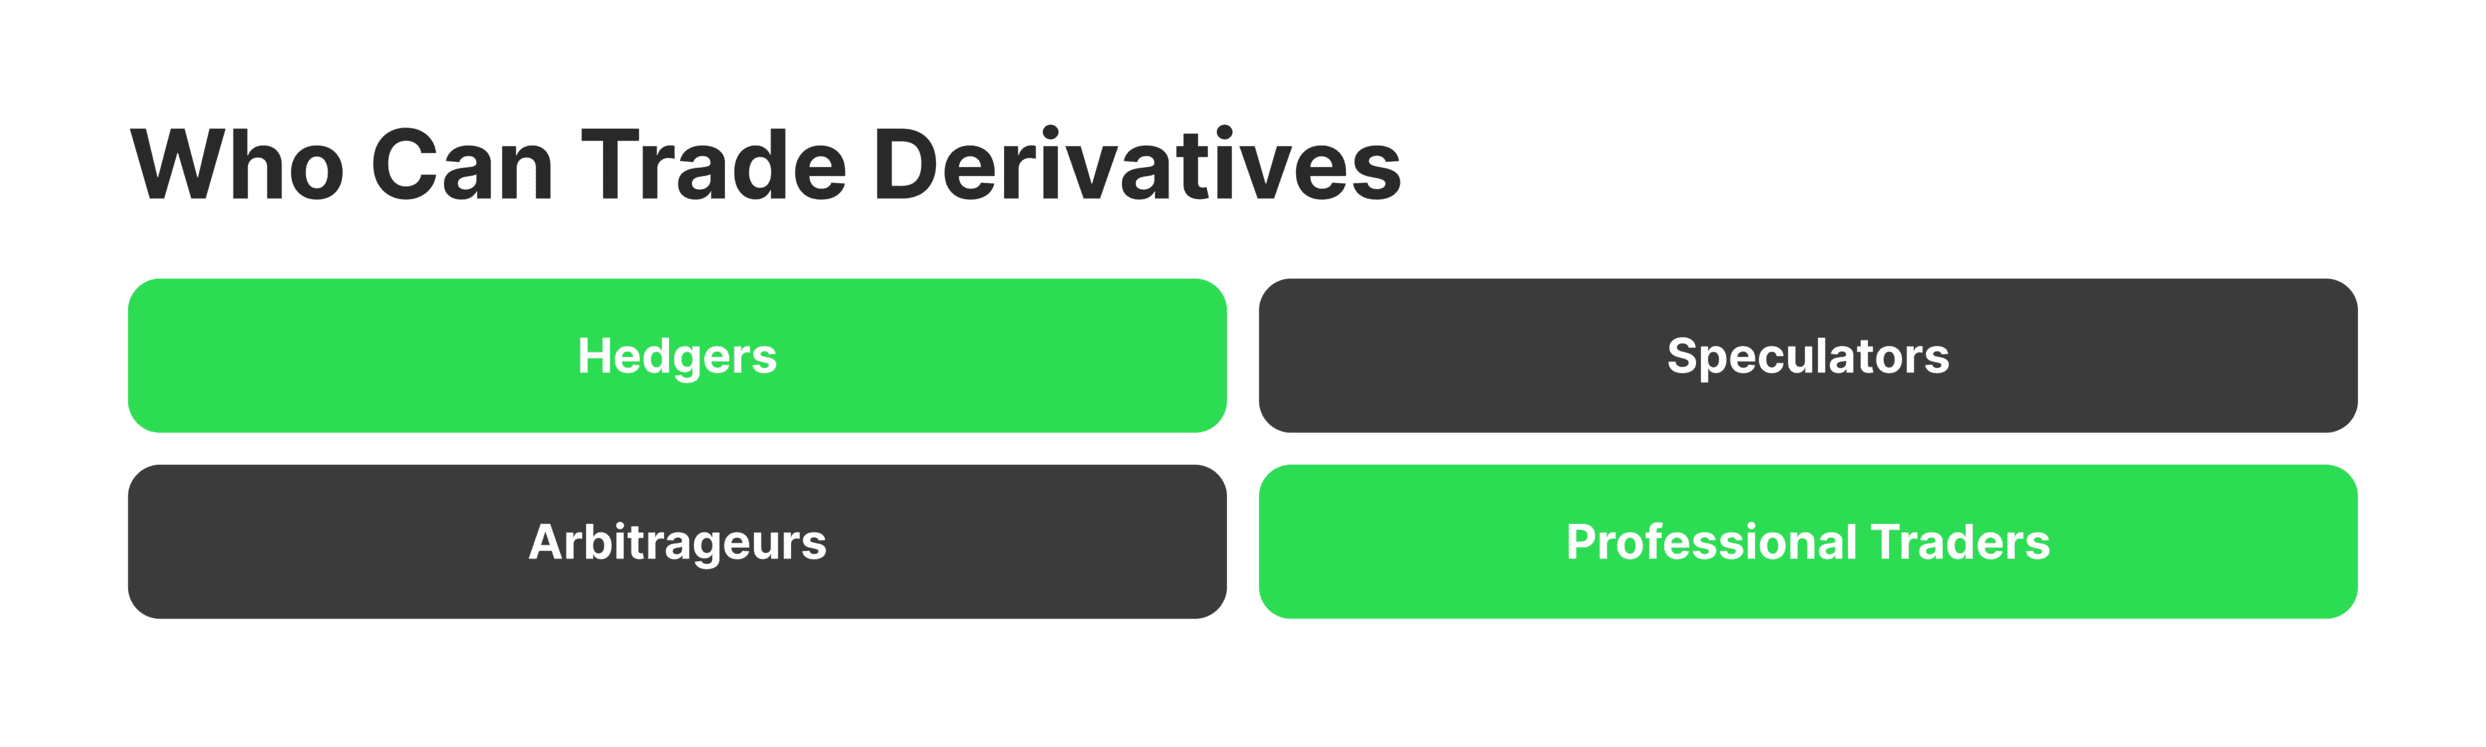 Who can trade with derivatives